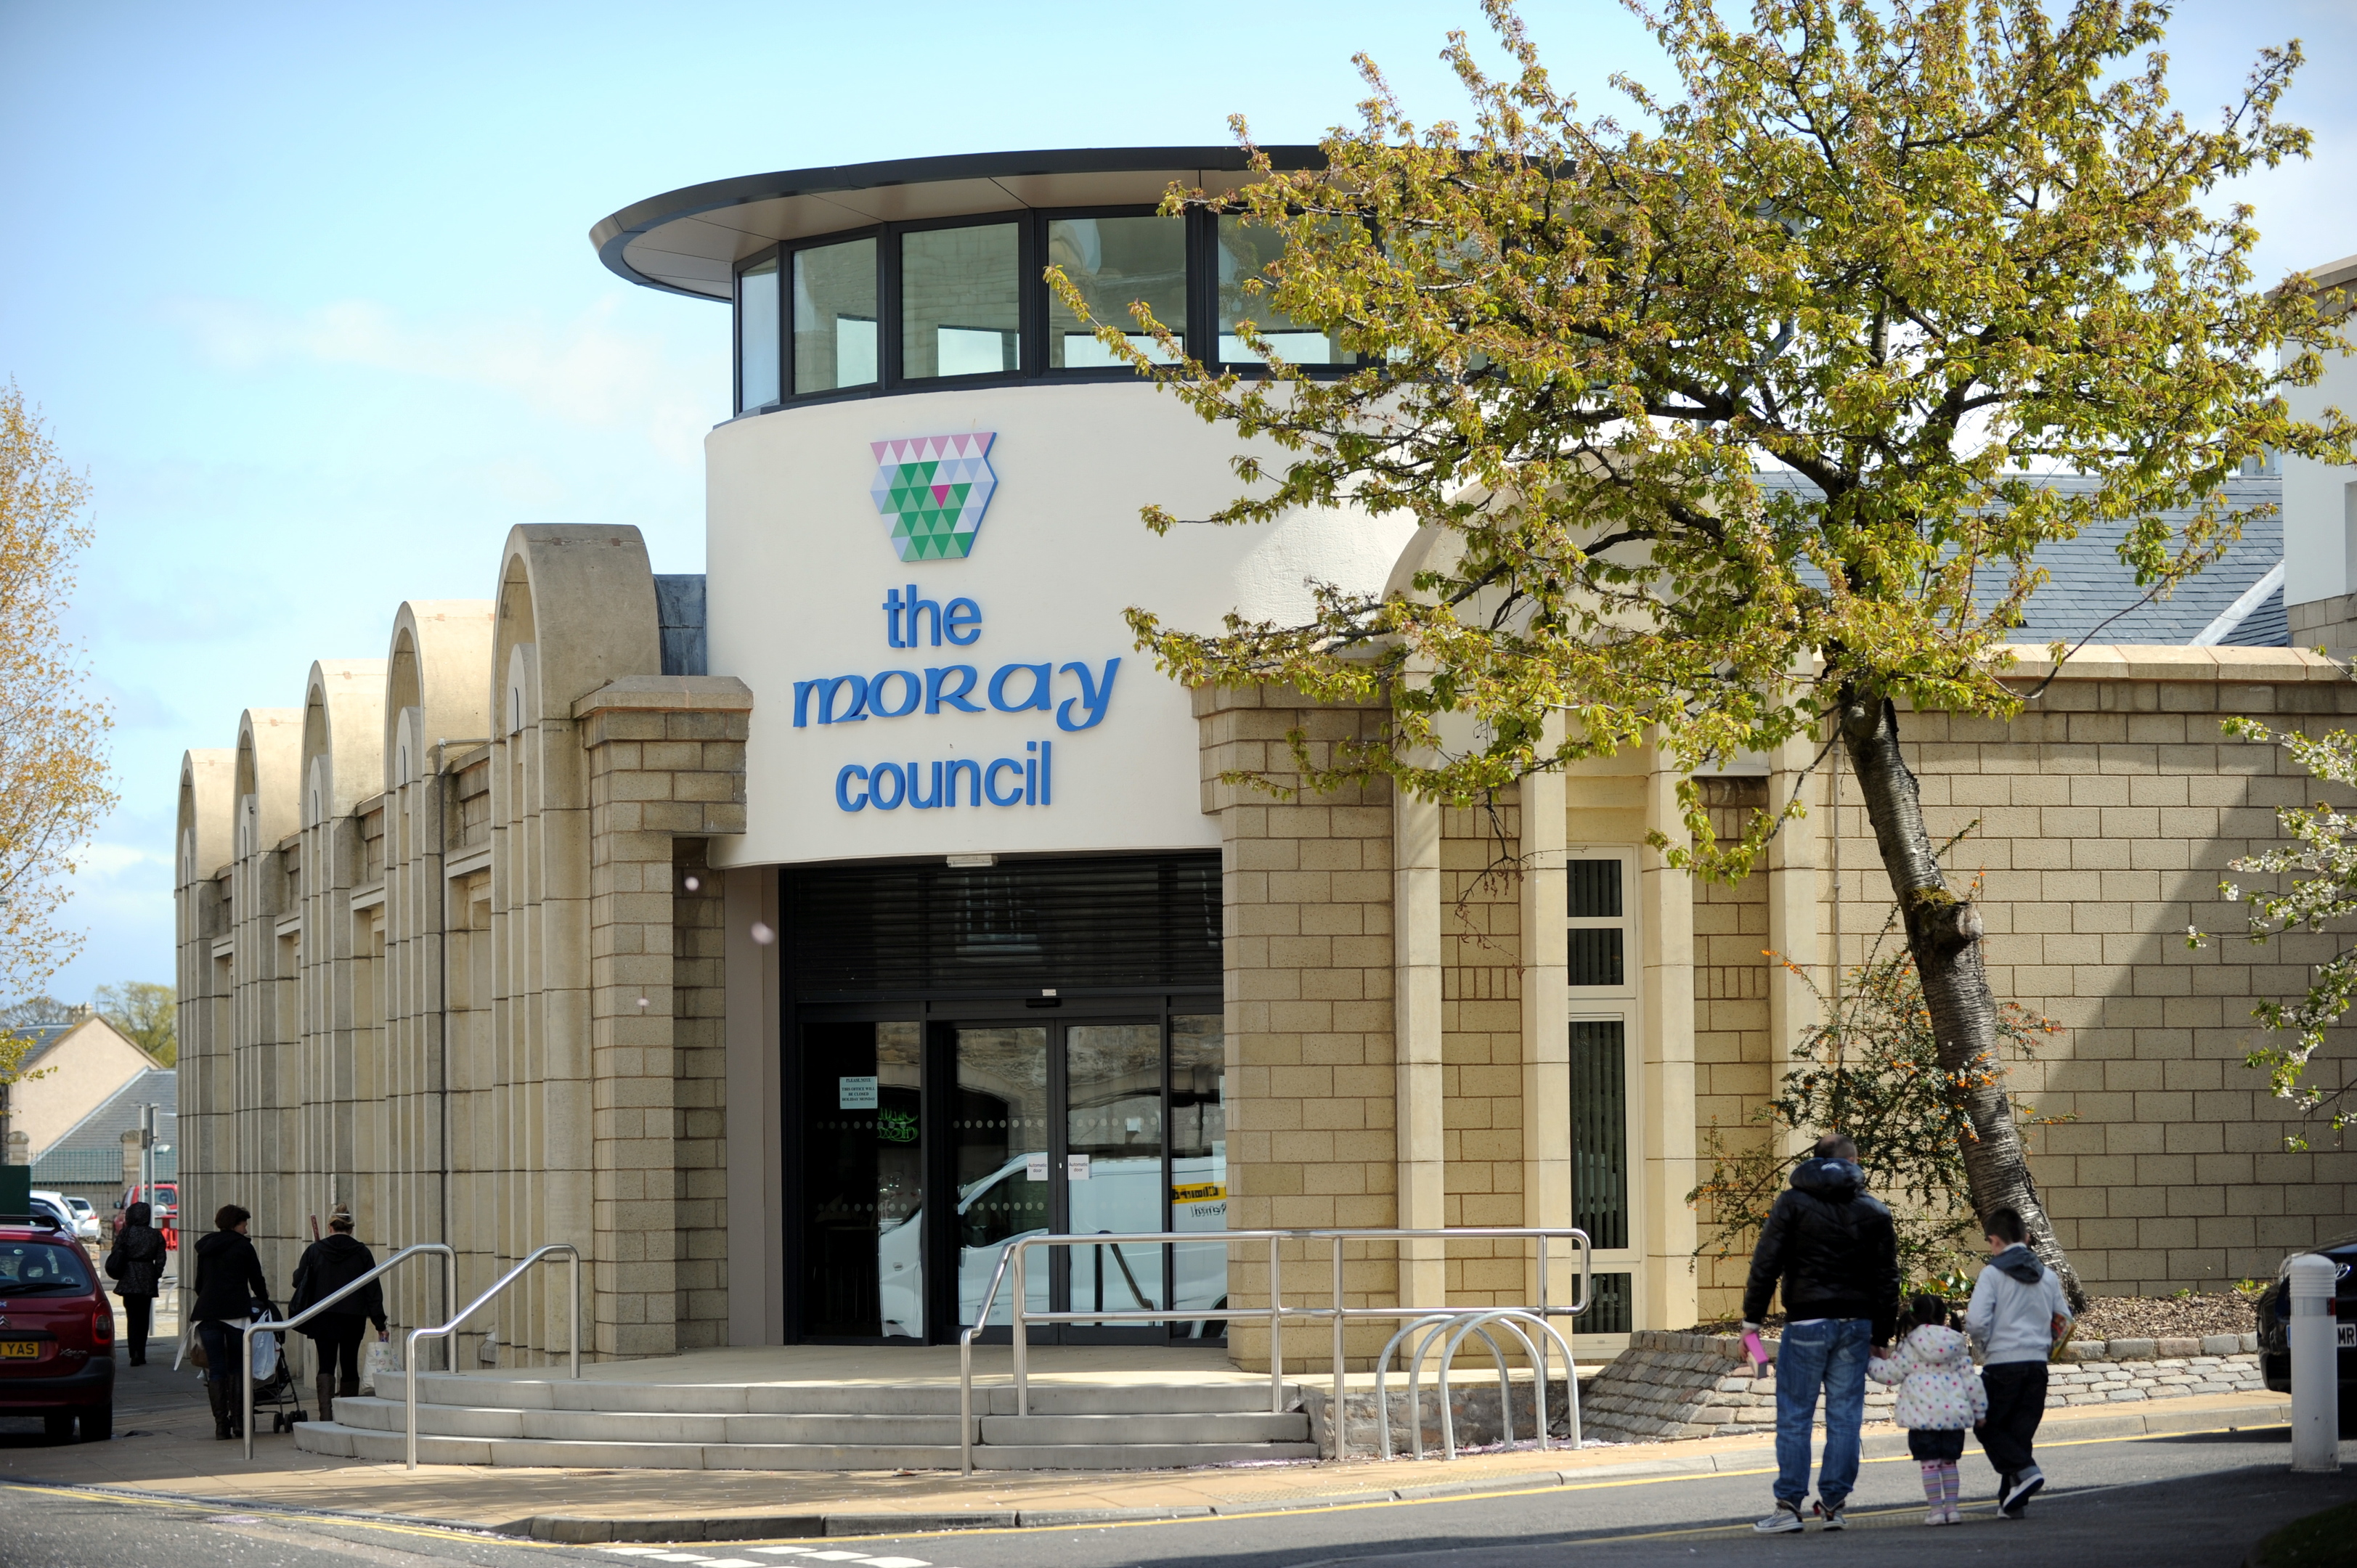 Moray Council was told to apologise to the pupil's parents.